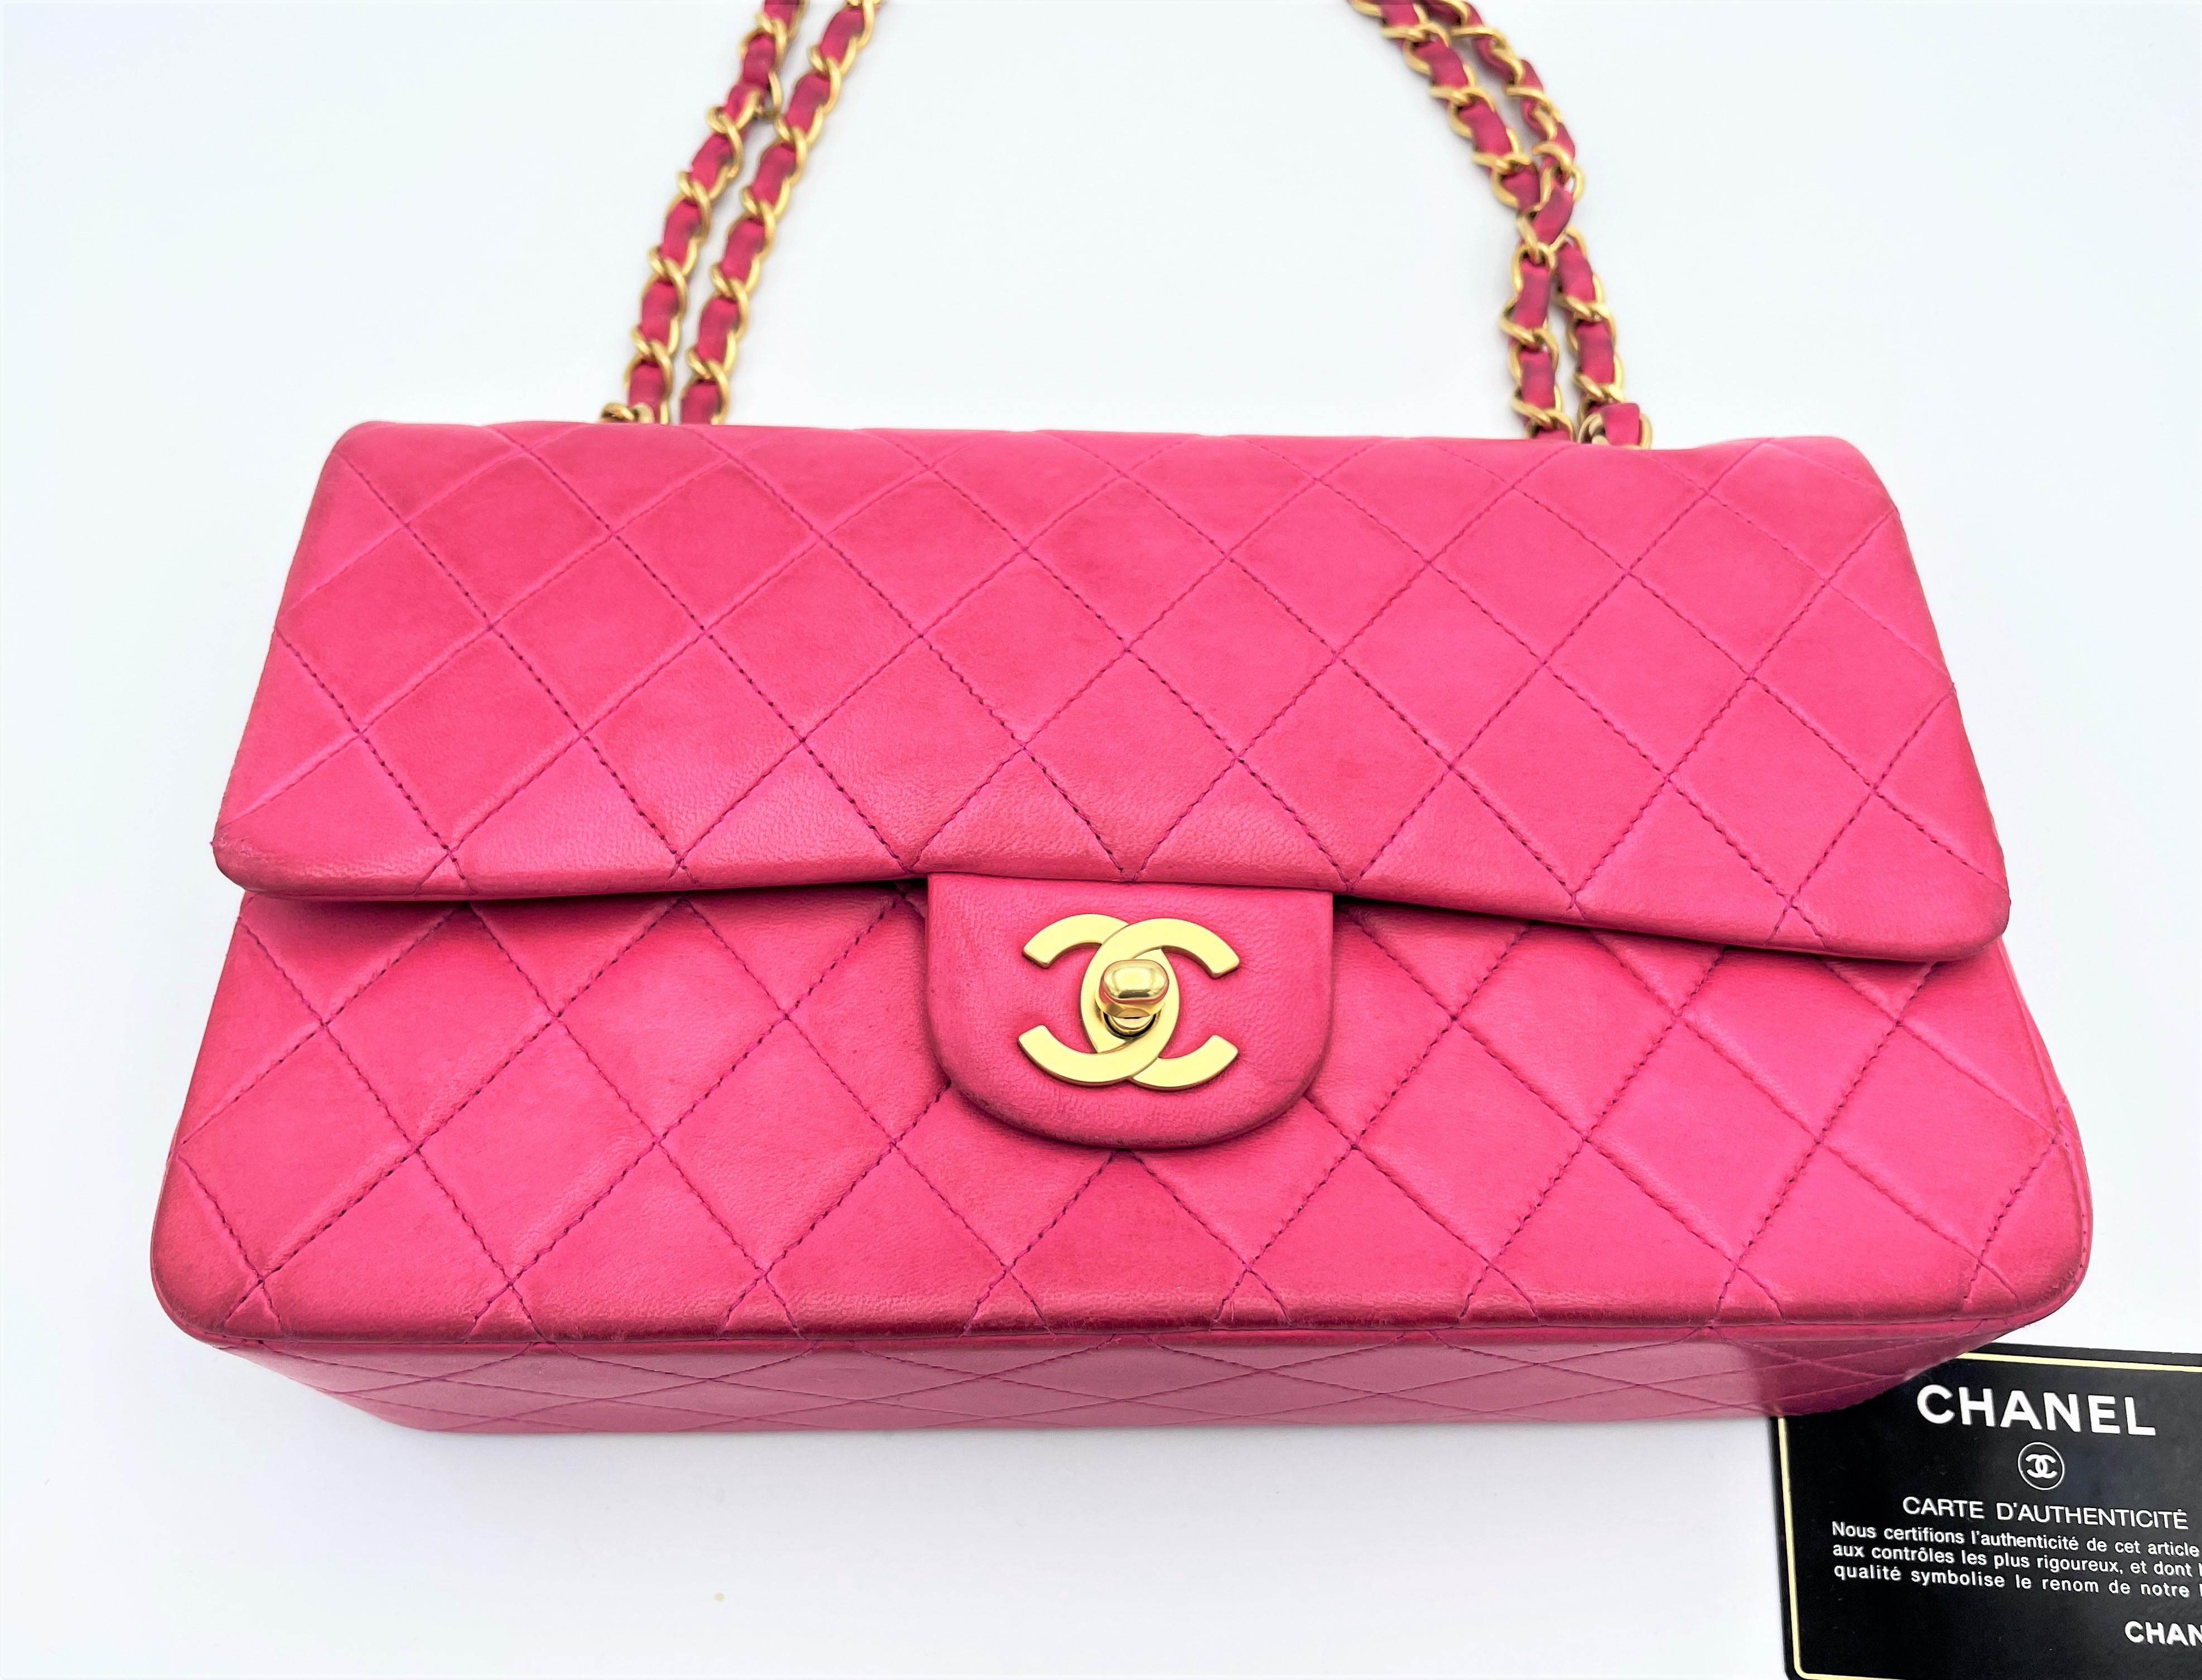 Vintage CHANEL bag, Modell 2,55 medium, double flap quilted lambskin, ID Code 6437921, great color inside also lined with leather of the same color. Great used condition with slight signs of wear. 
Measurement:  H 15 cm x L 23 cm x D 6,5 cm.